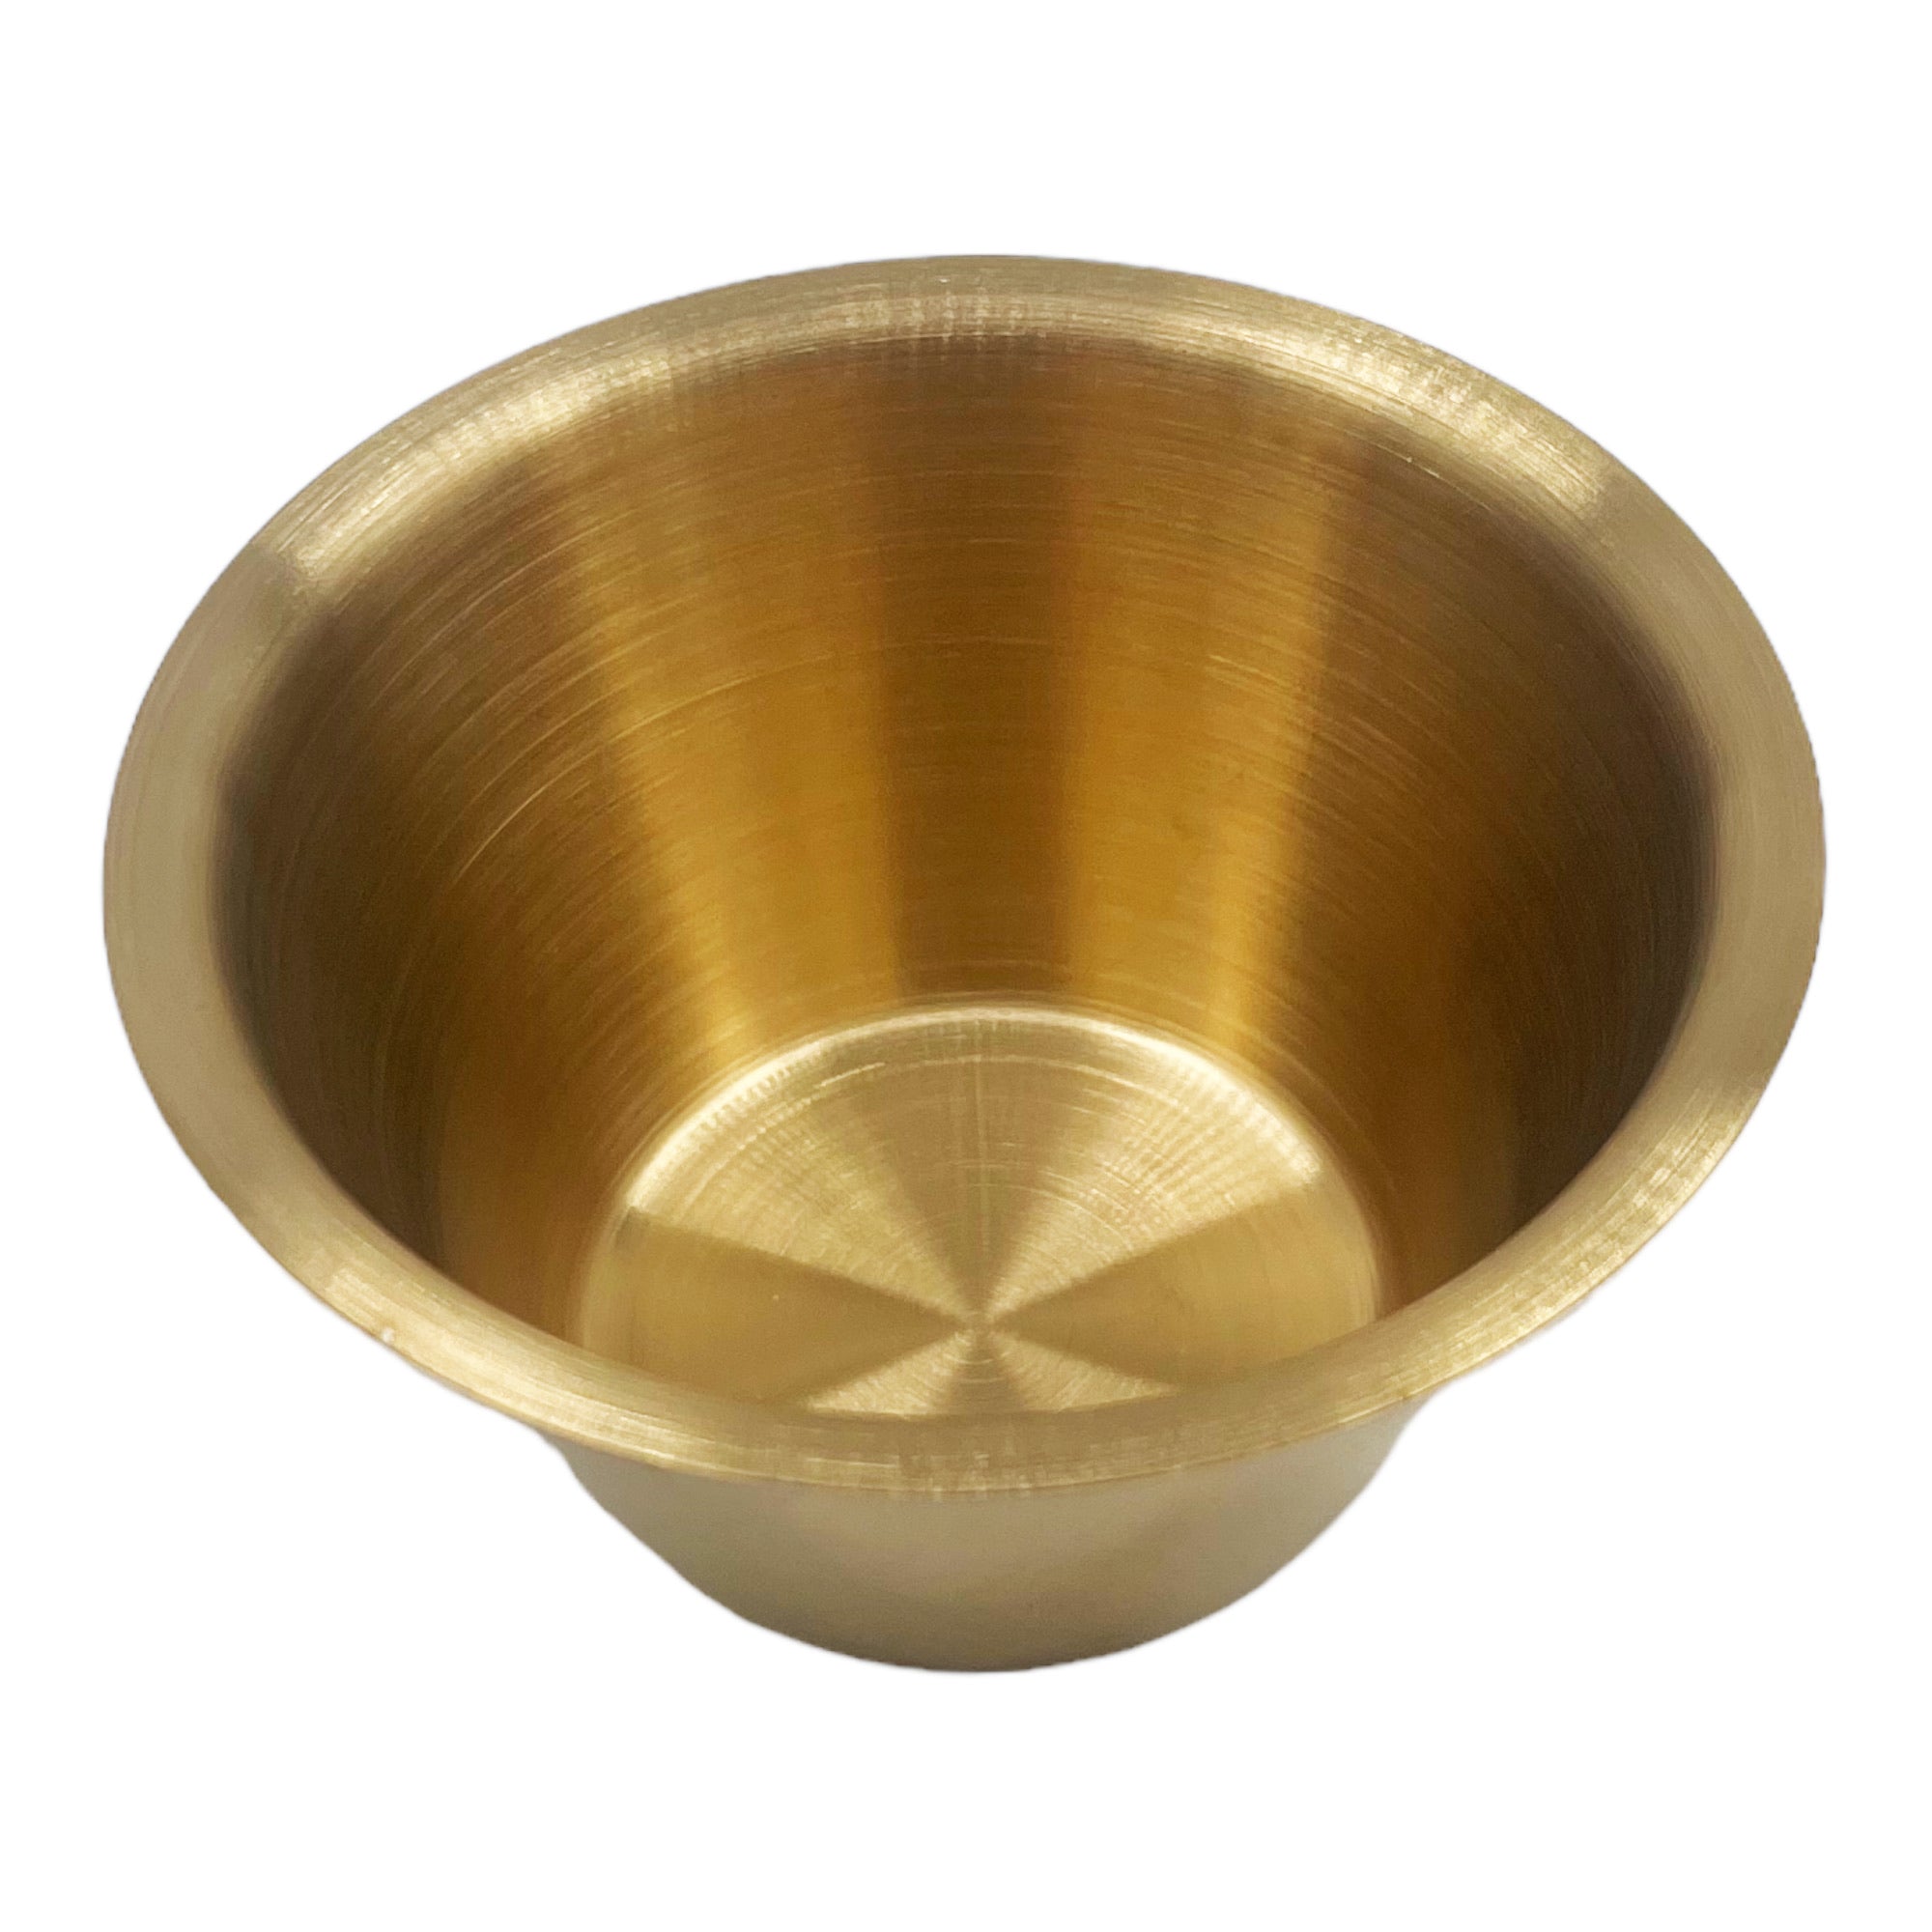 Eson - Stainless Steel Shaving Bowl Cup Gold 5.5x10cm